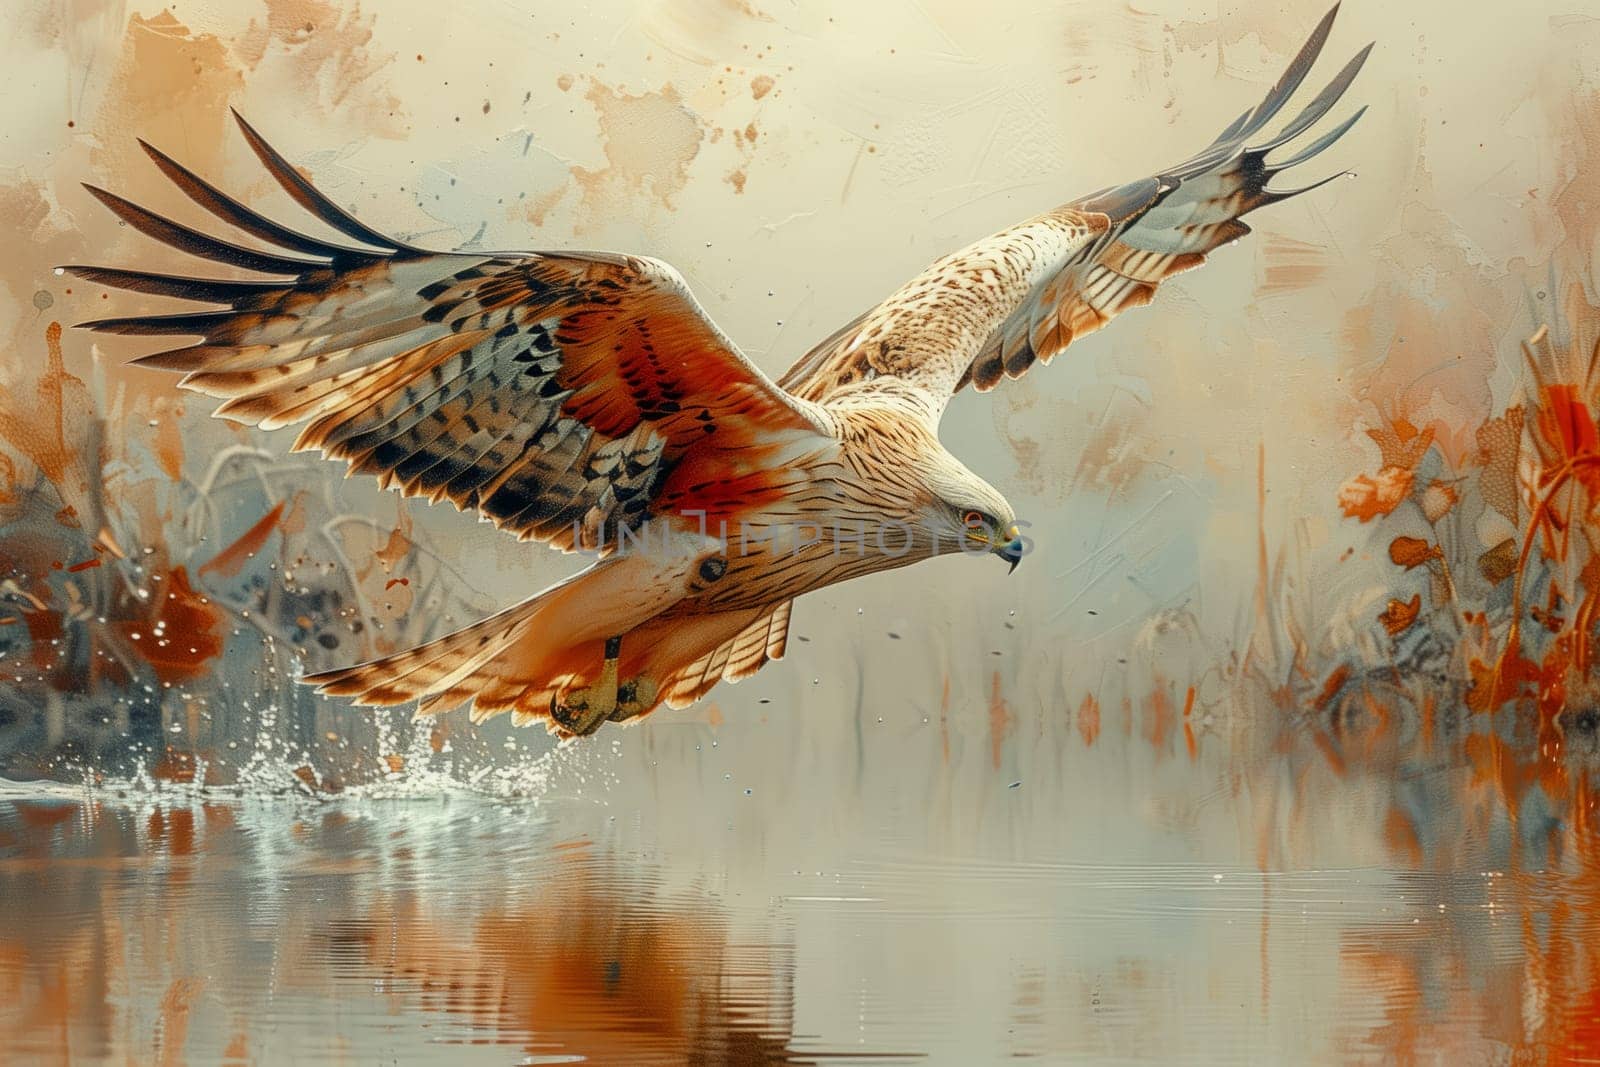 Accipitridae bird soars over water in natural environment with sky and feathers by richwolf